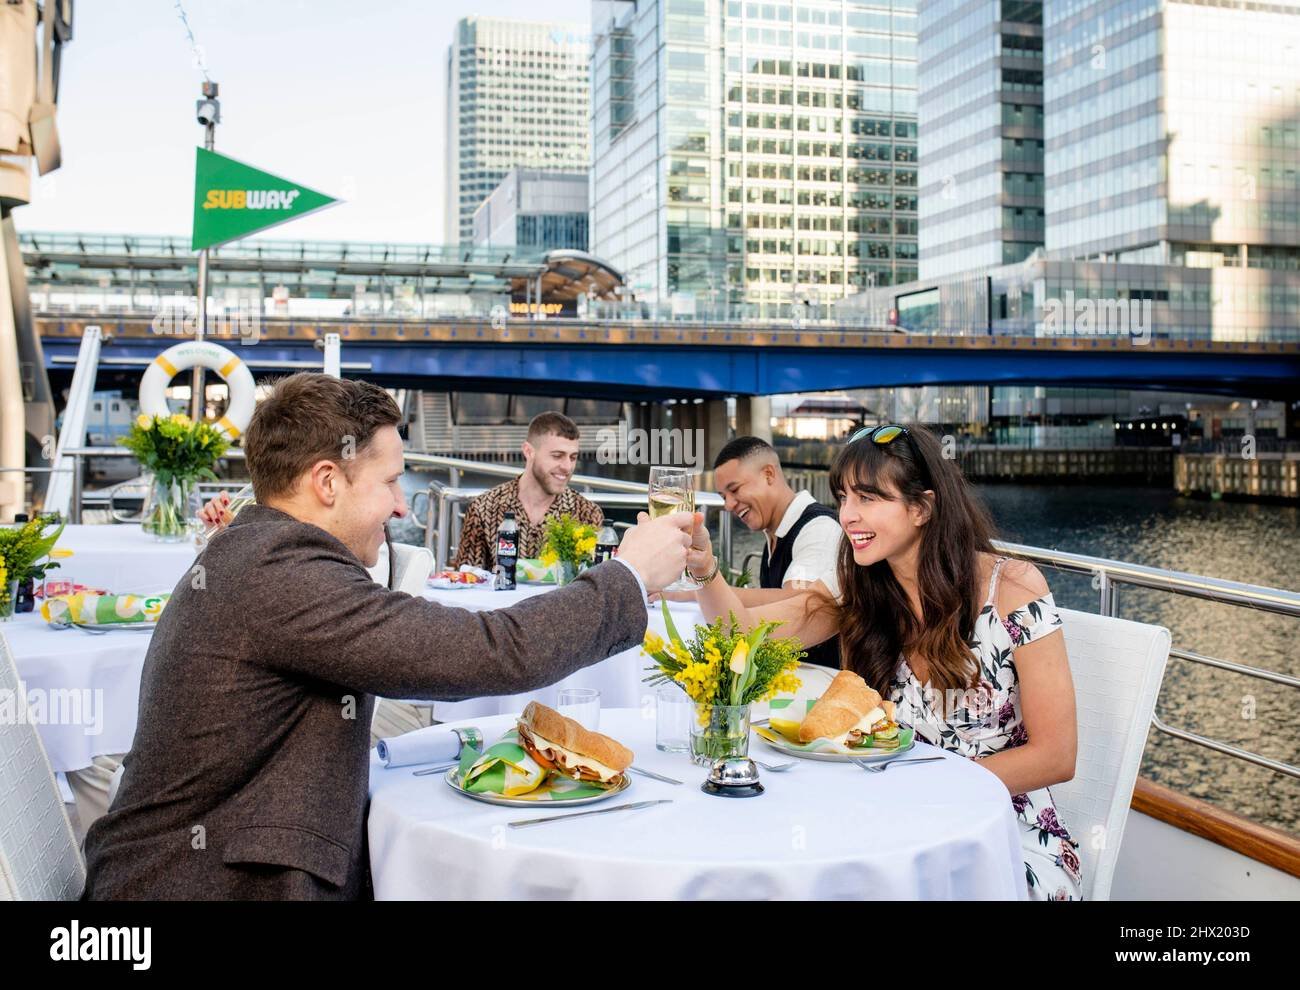 editorial-use-only-oliver-left-and-shelly-from-london-at-the-launch-of-the-subway-pop-up-champagne-and-subs-restaurant-aboard-a-yacht-on-the-thames-river-in-london-issue-date-wednesday-march-9-2022-2HX203D.jpg